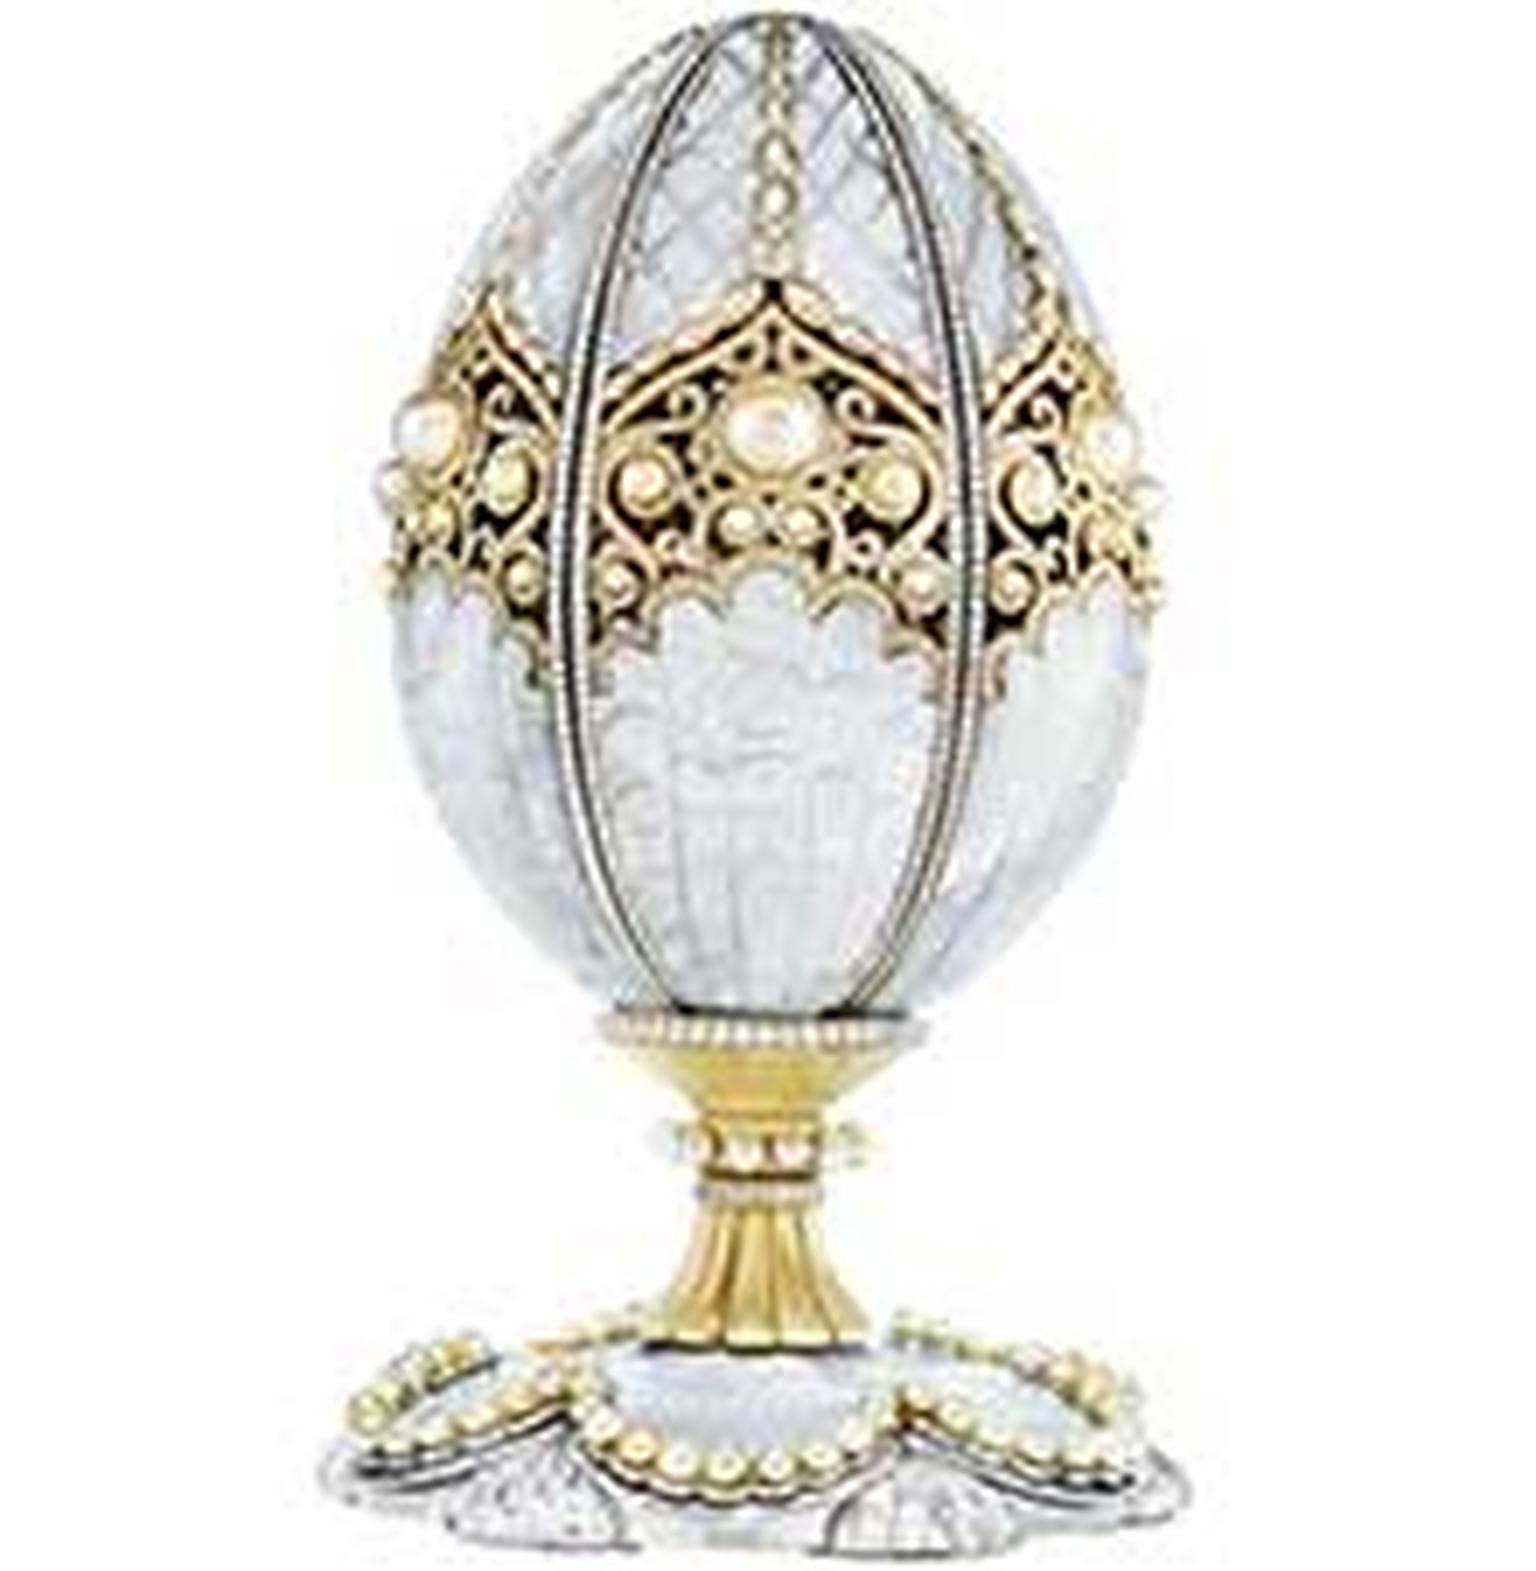 New Faberge egg